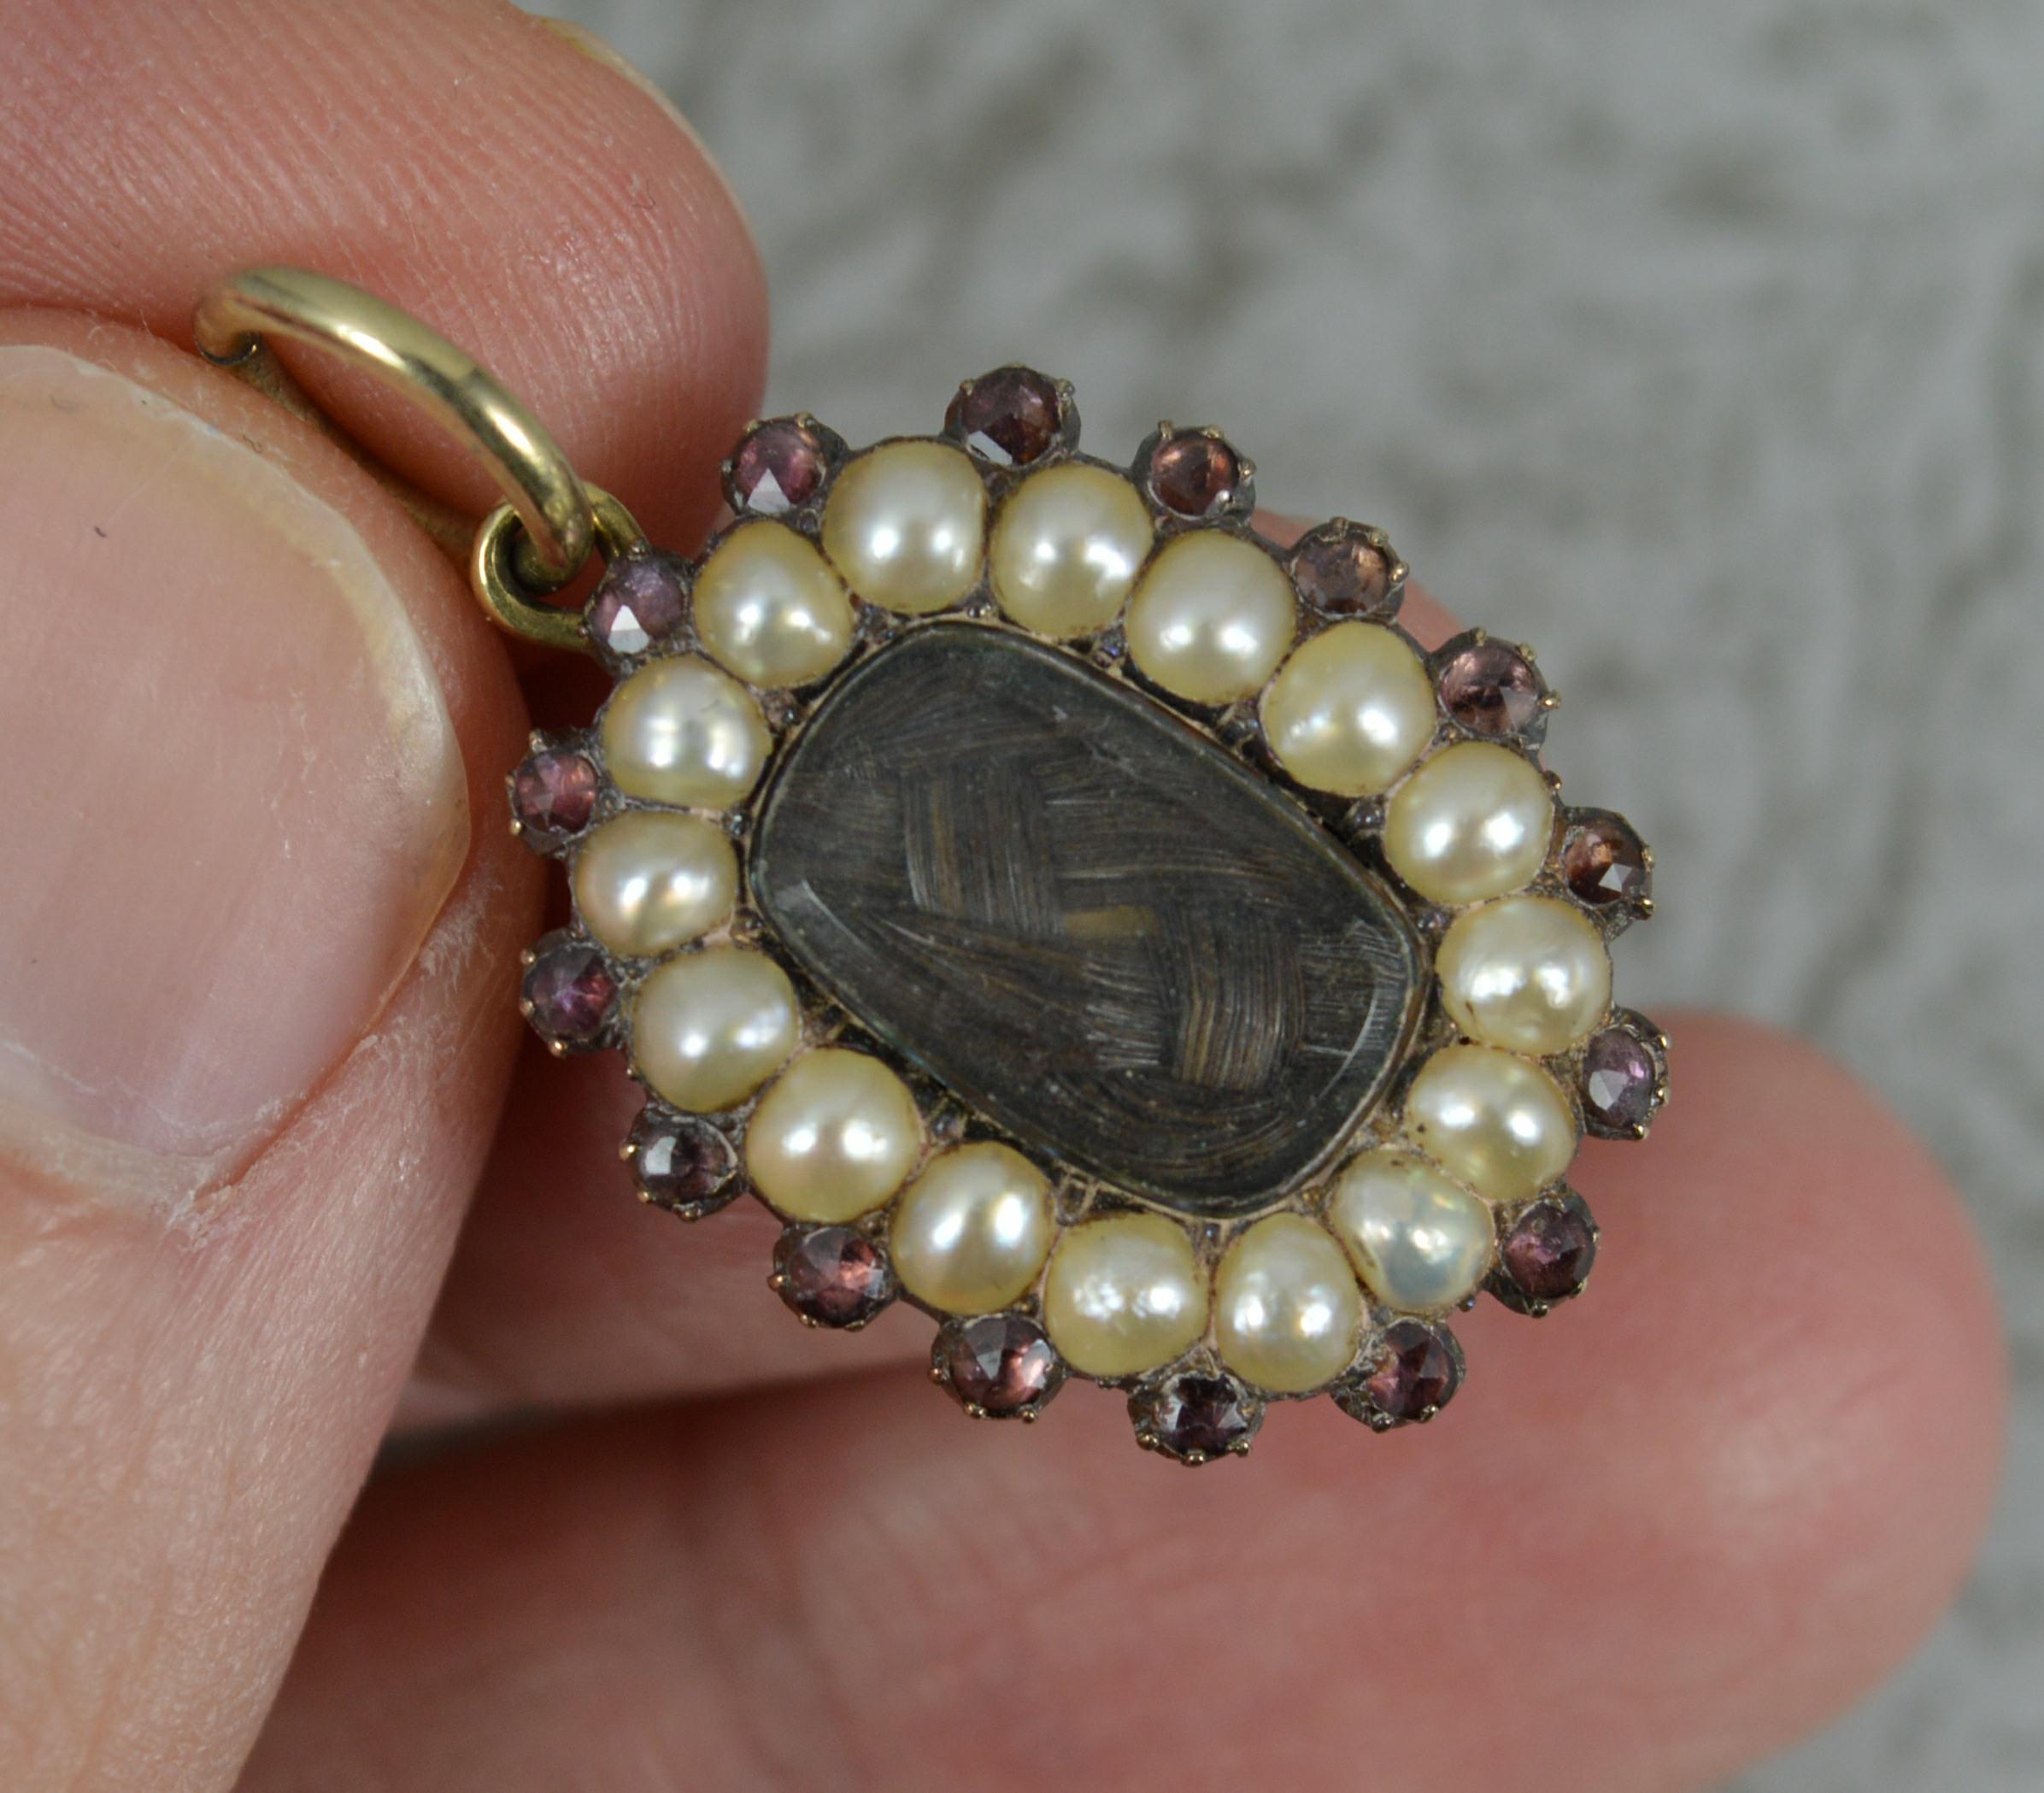 A superb Georgian period mourning pendant.
Solid gold example.
The front holds a locket containing hair to centre with full border of pearls and outer border of garnets.
The reverse with full engraving confirming 1826 period.

CONDITION ; Very for